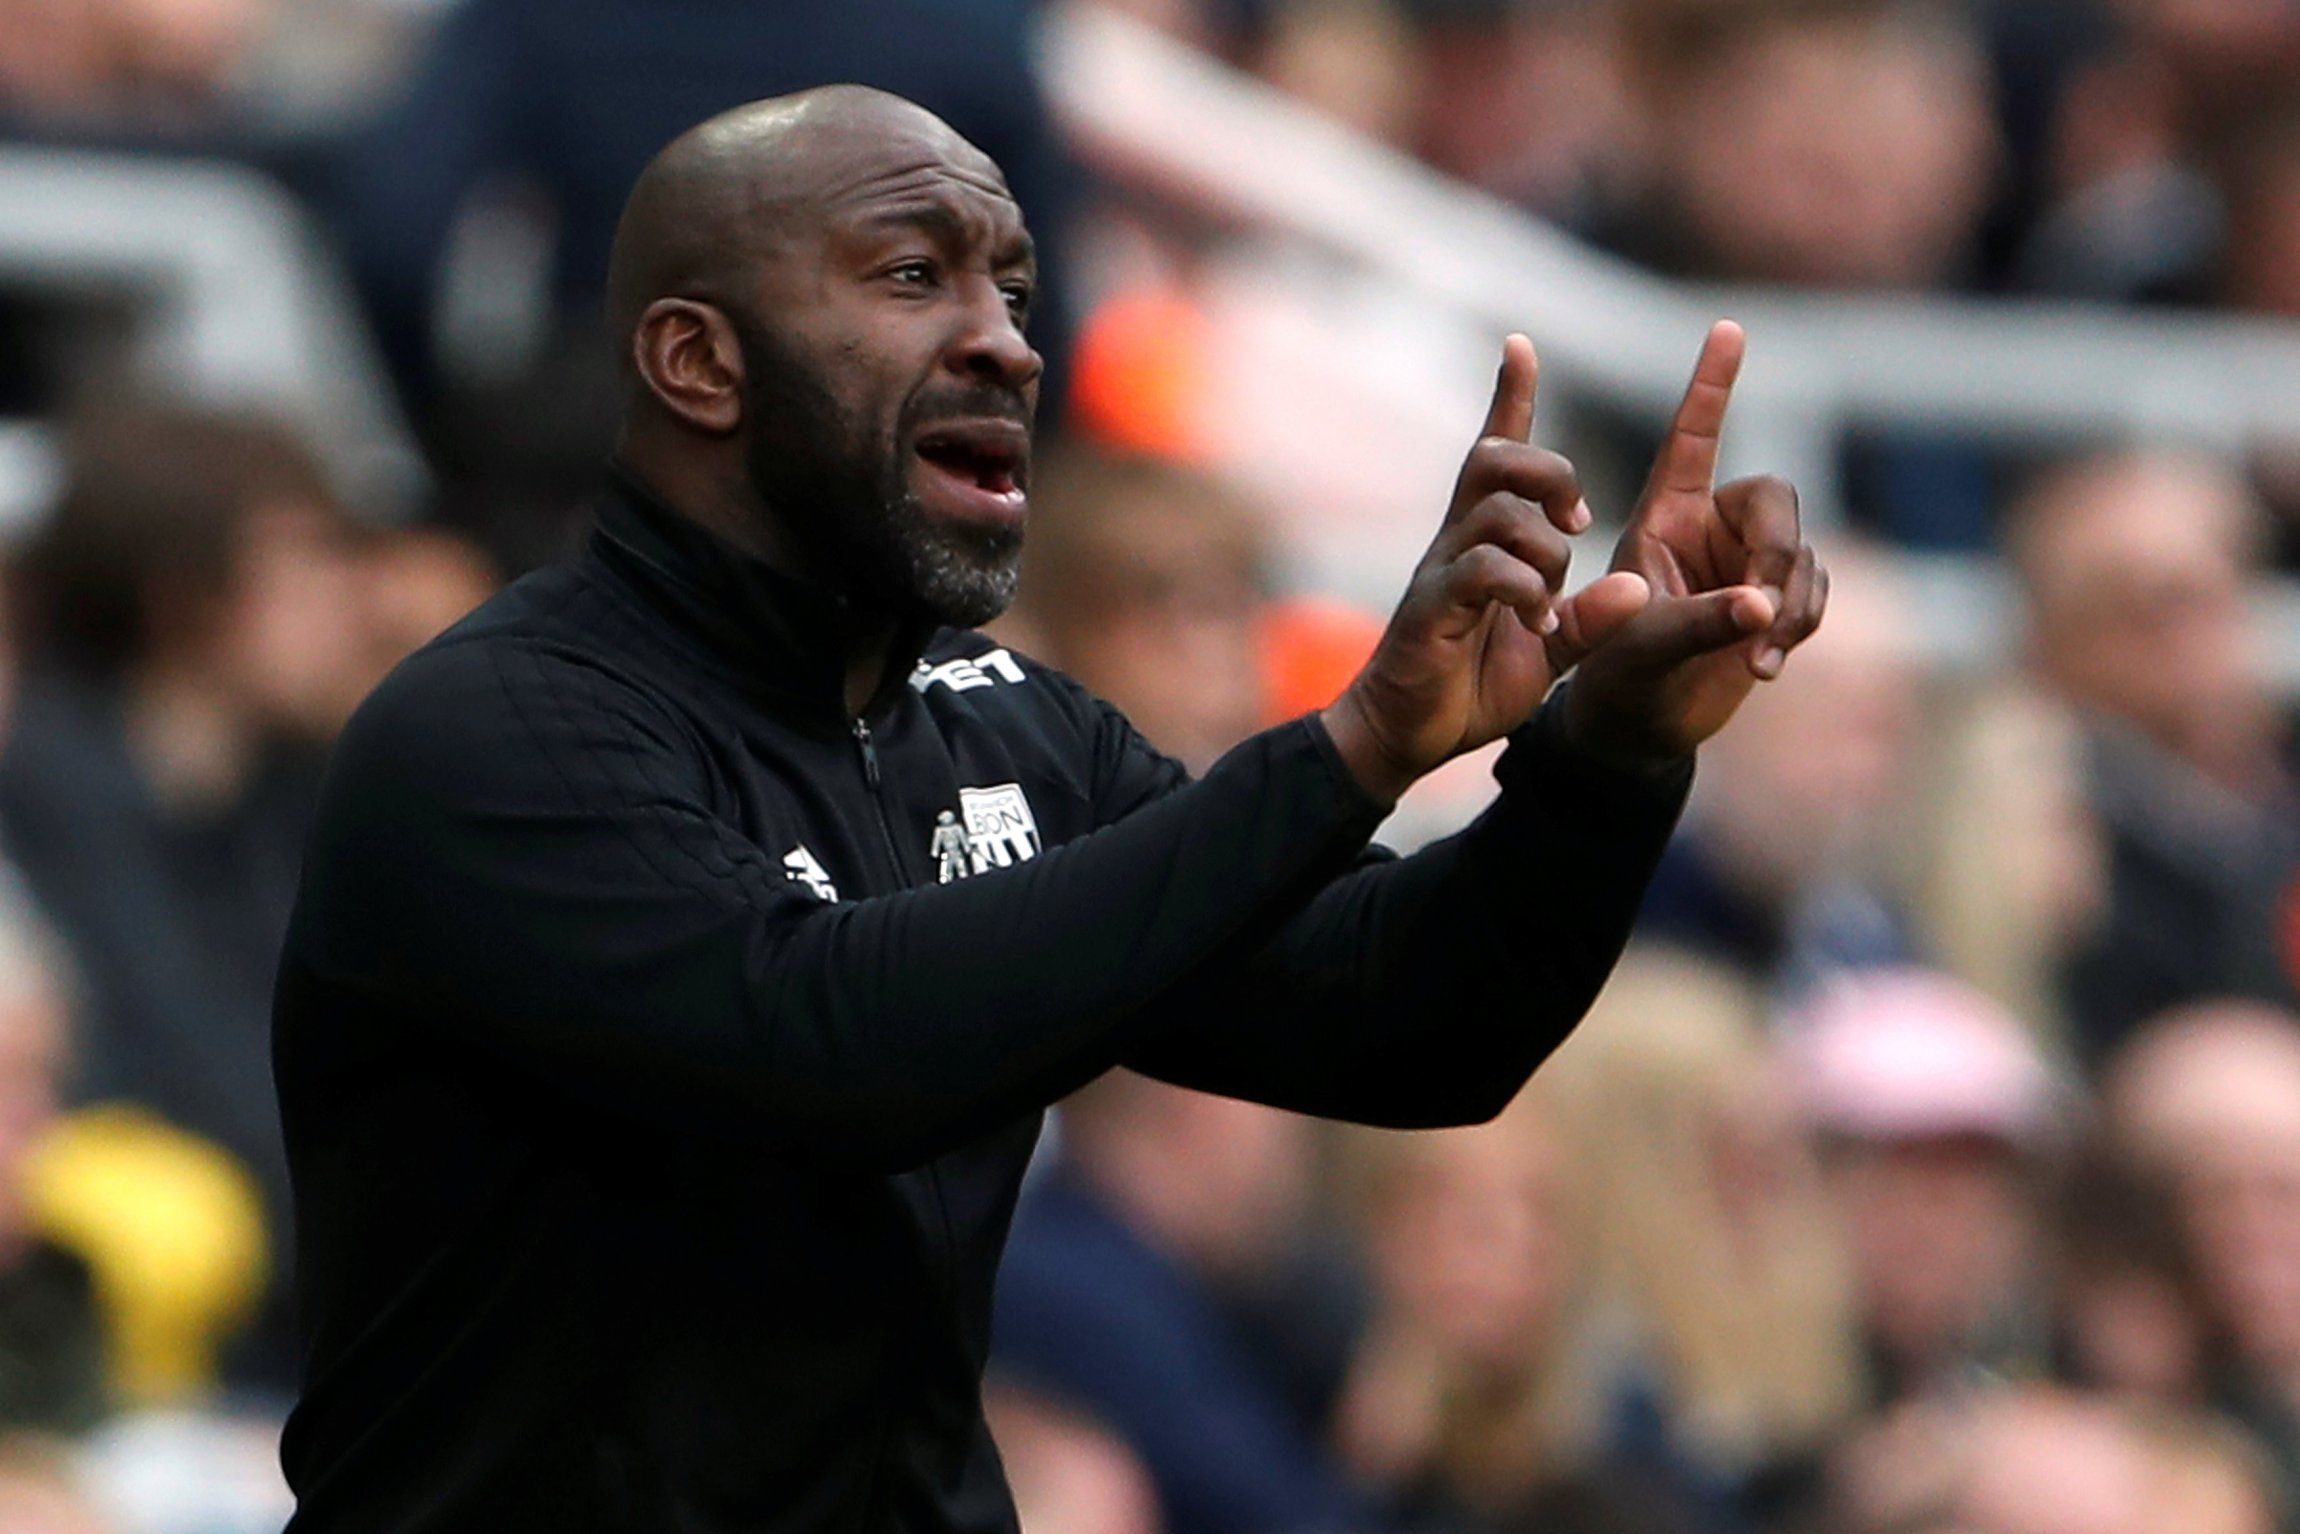 Darren Moore gives instructions from the touchline